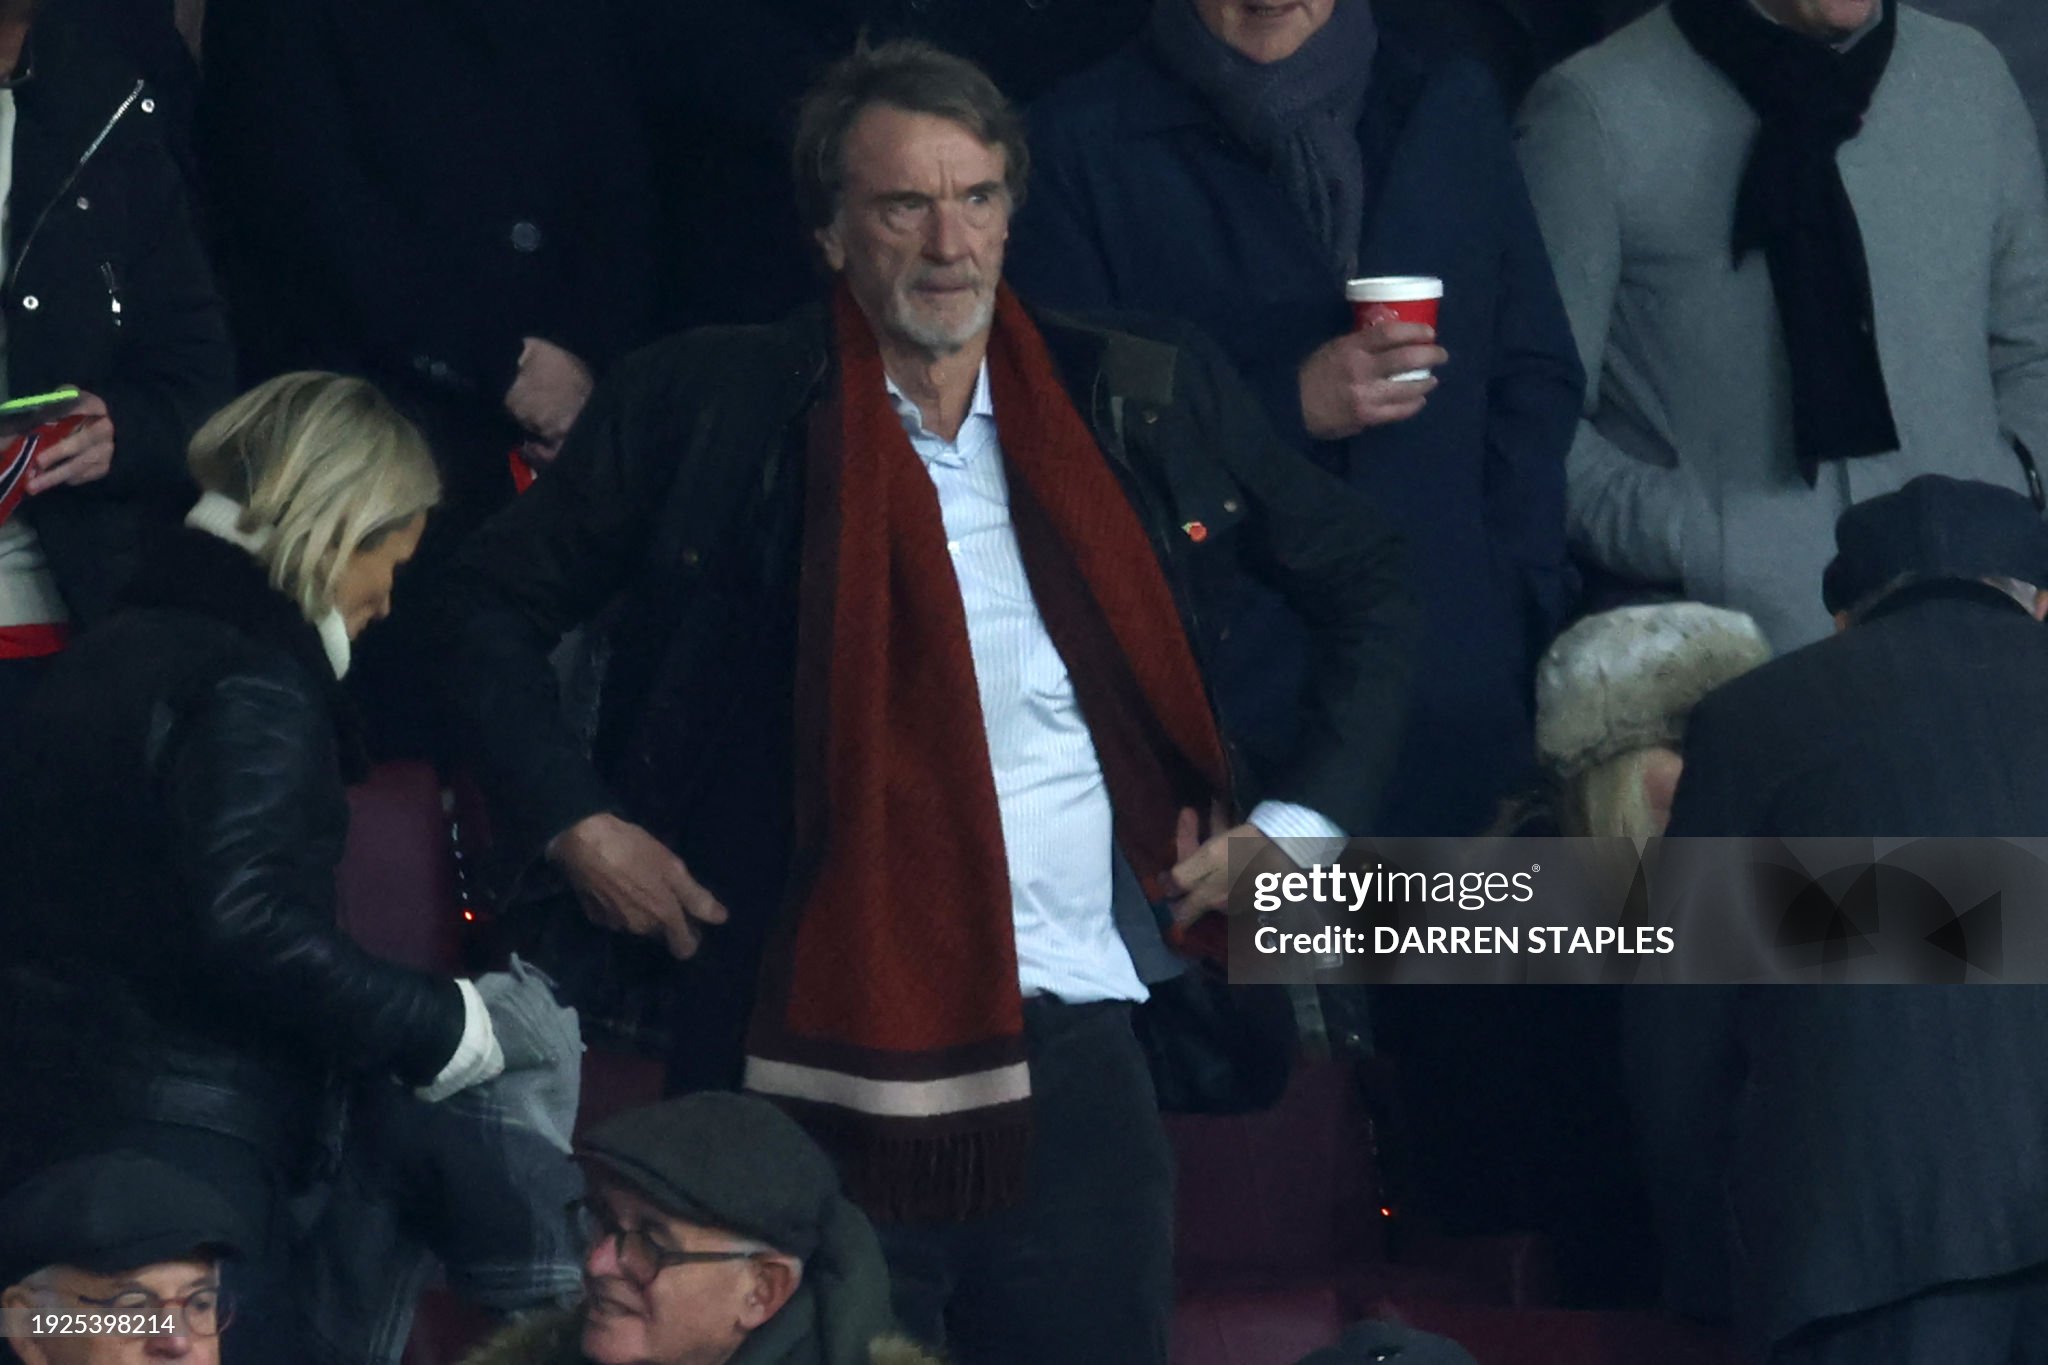 Multimillionaire Jim Ratcliffe announced as co-owner of Manchester United